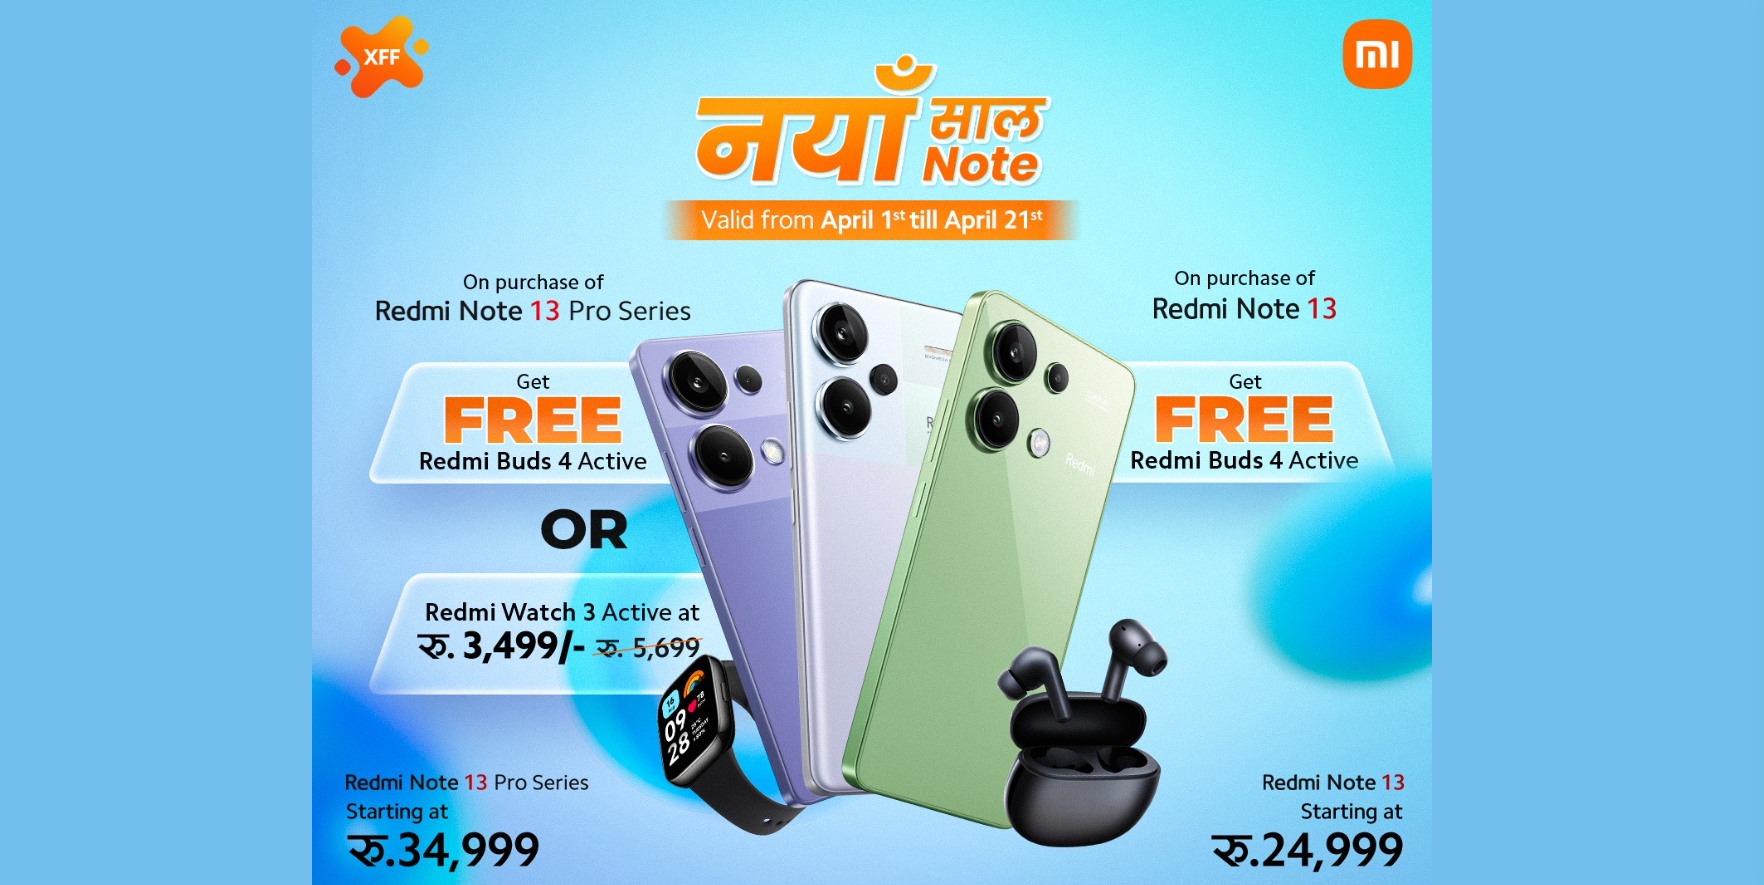 Redmi Note 13 Series Got a Sweet Deal Going on this New Year 2081